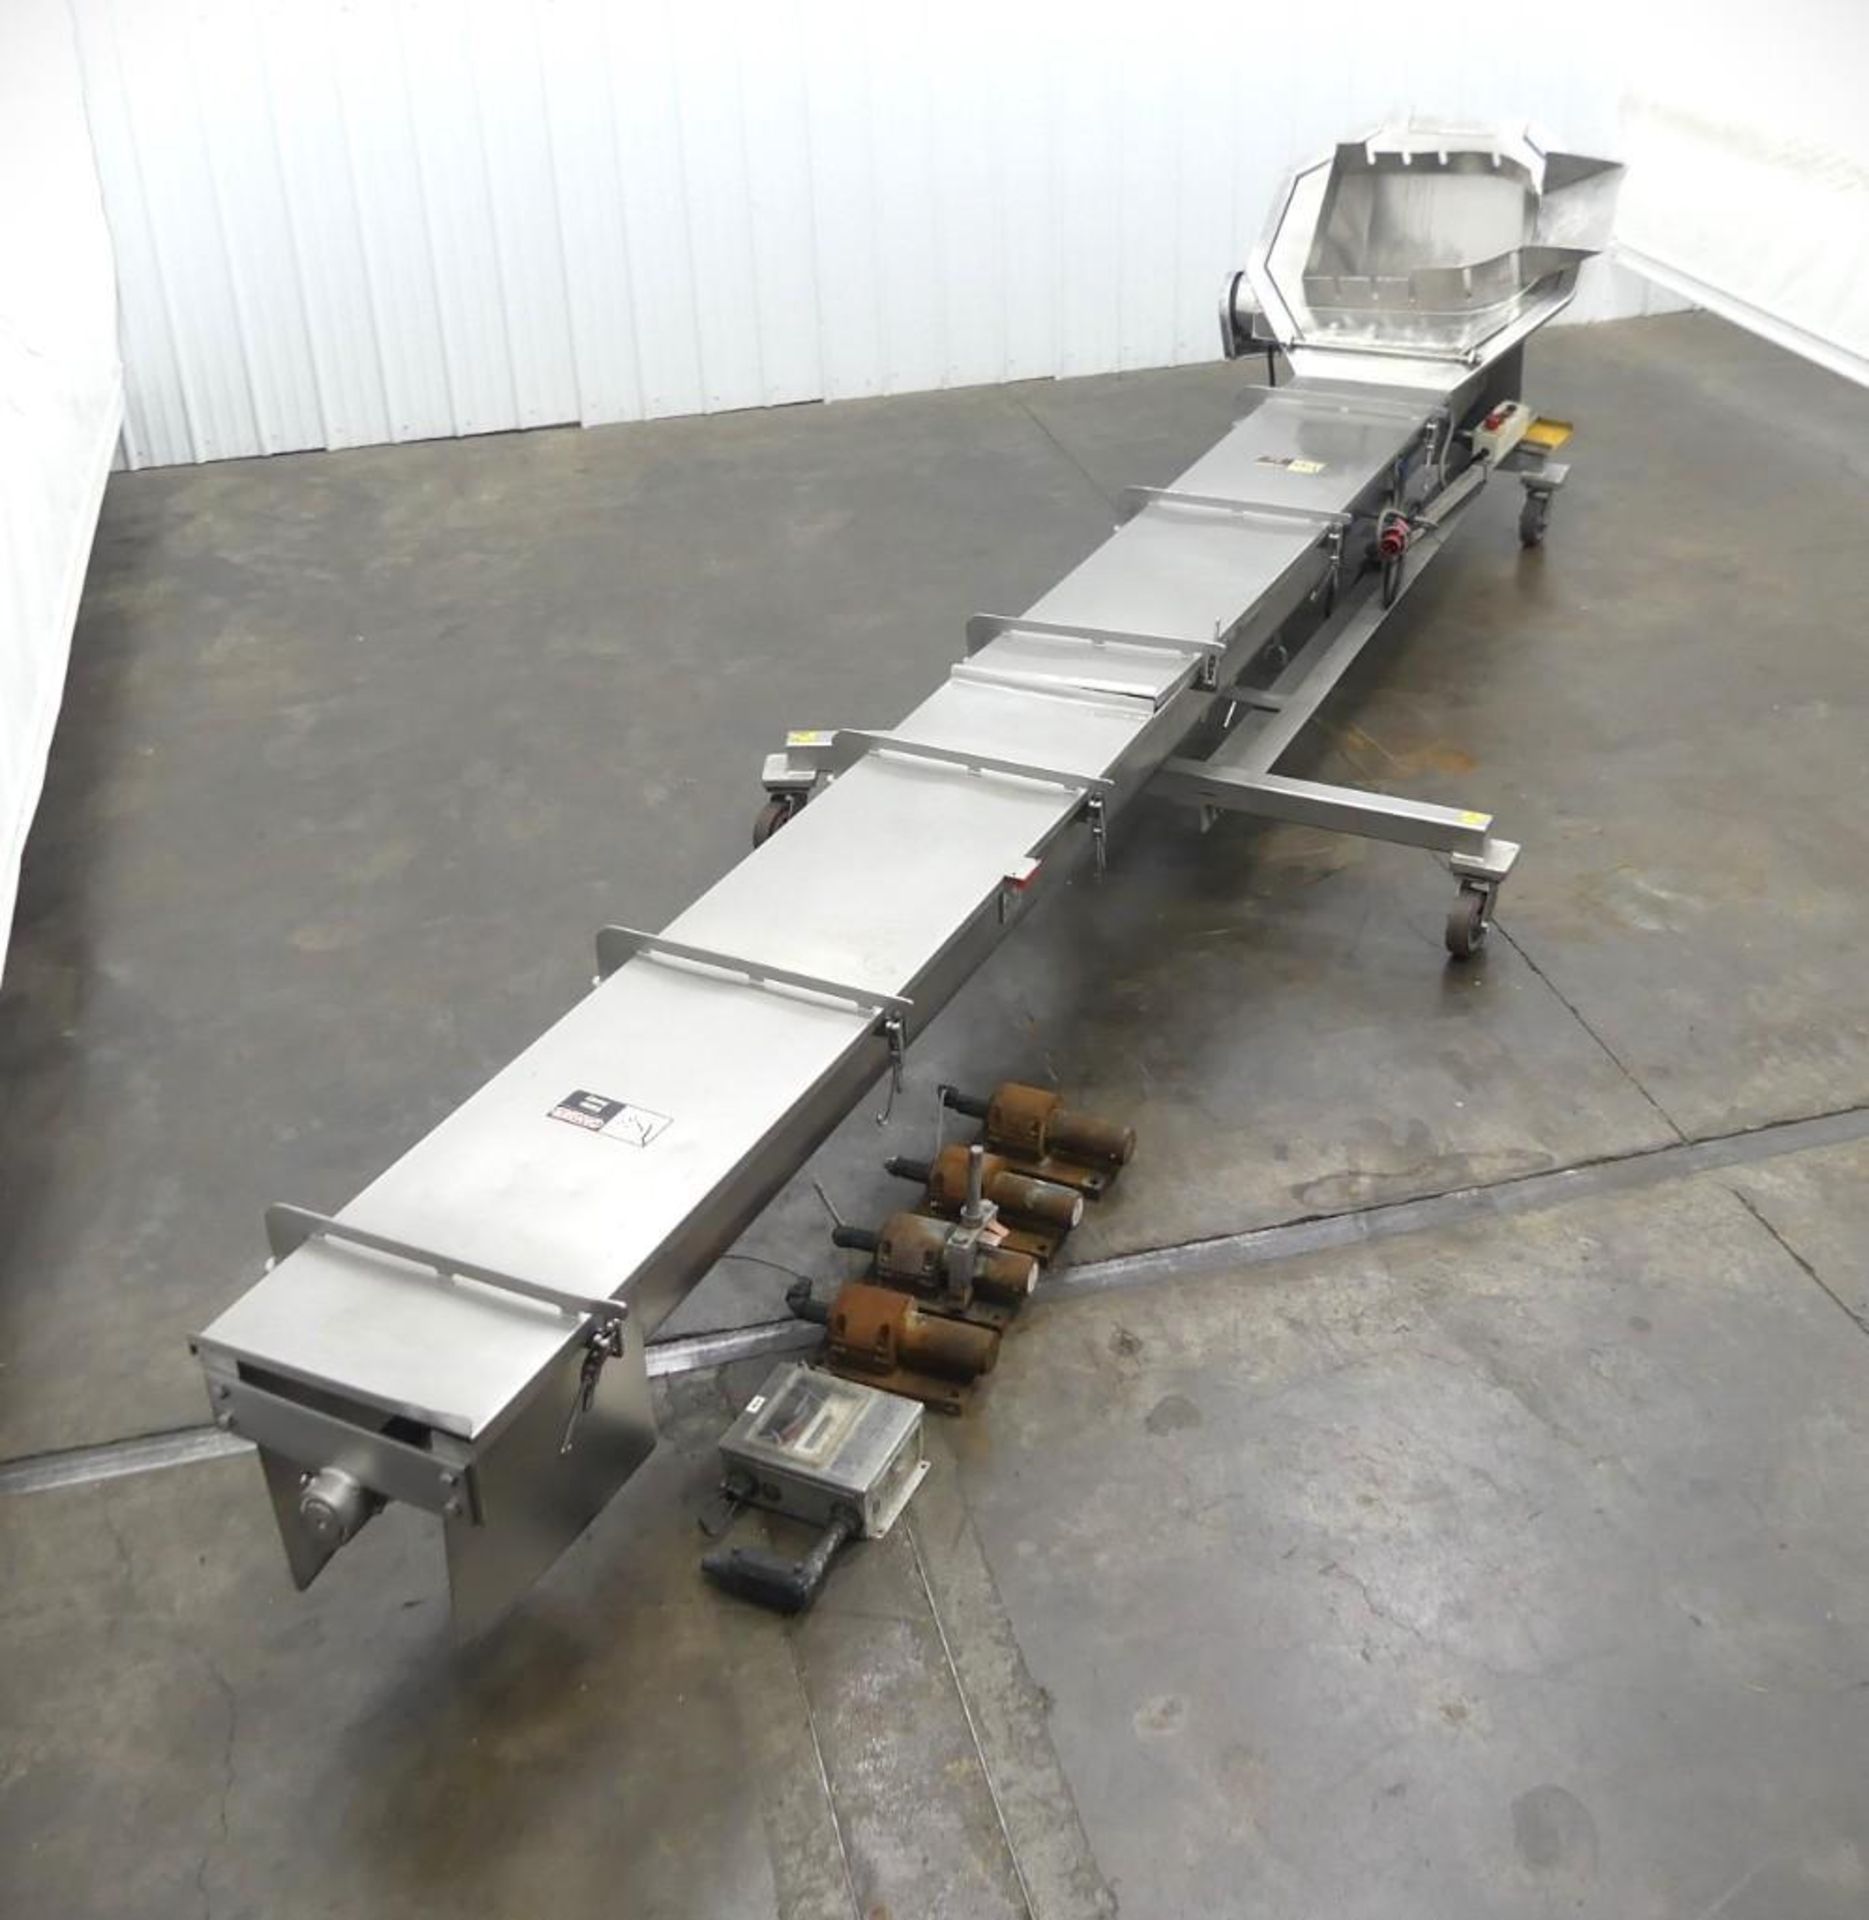 SS Trough Auger Conveyer 217"Long x 70" Wide - Image 2 of 15